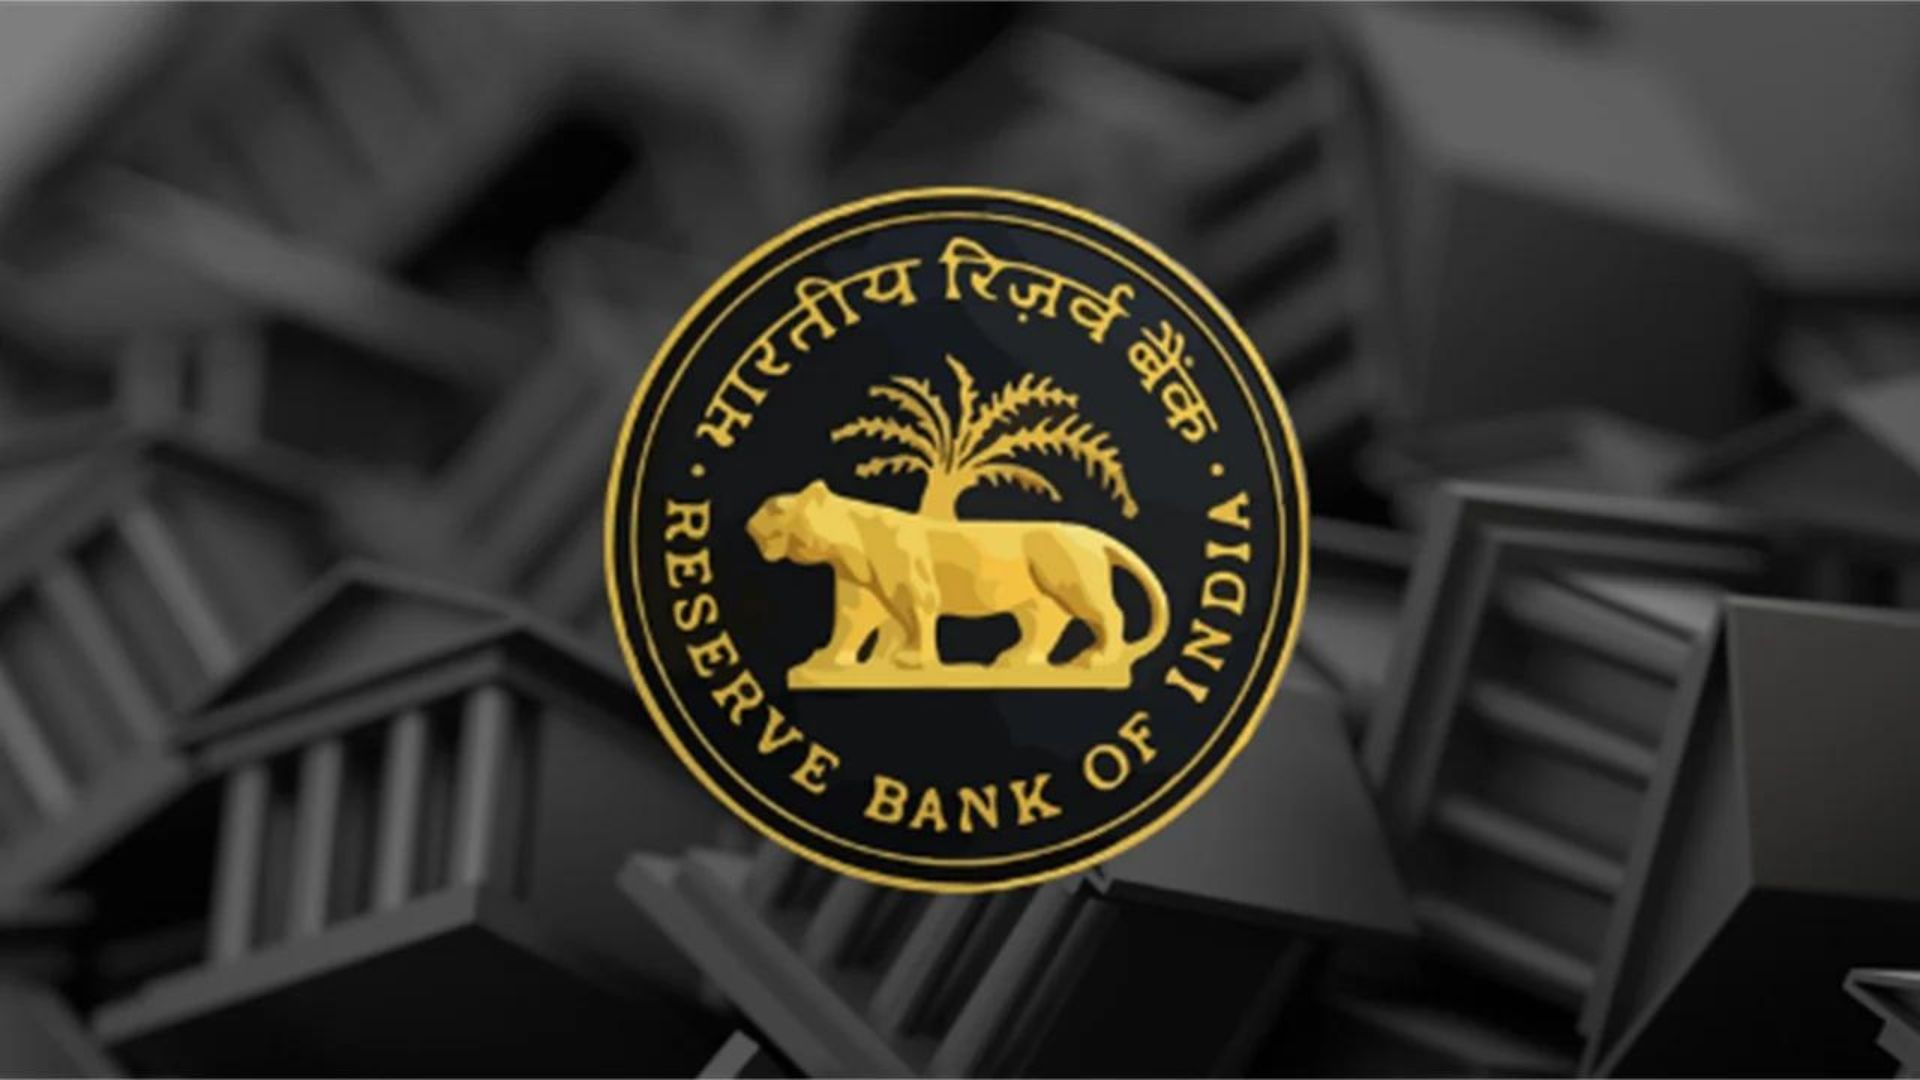 S&P global report on RBI: Regulatory steps will make financial sector strong